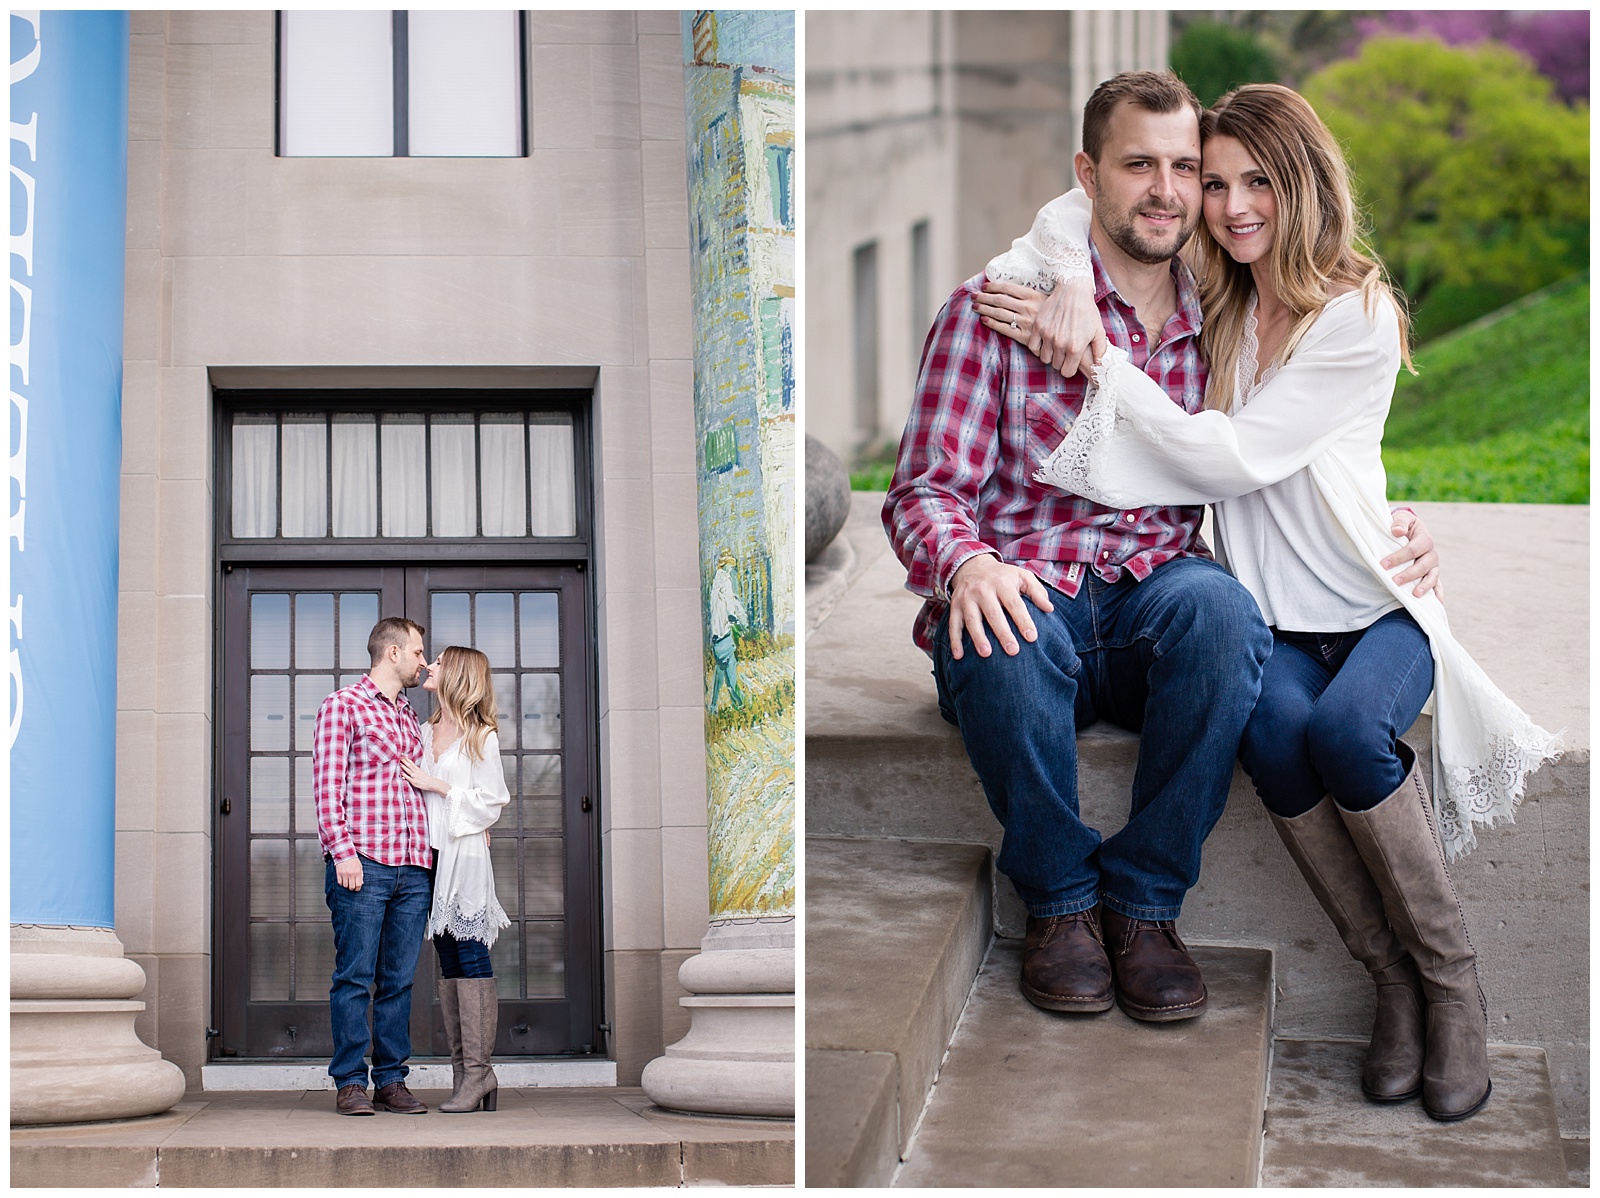 Engagement photography at the Nelson-Atkins Museum of Art by Wisdom-Watson Weddings.